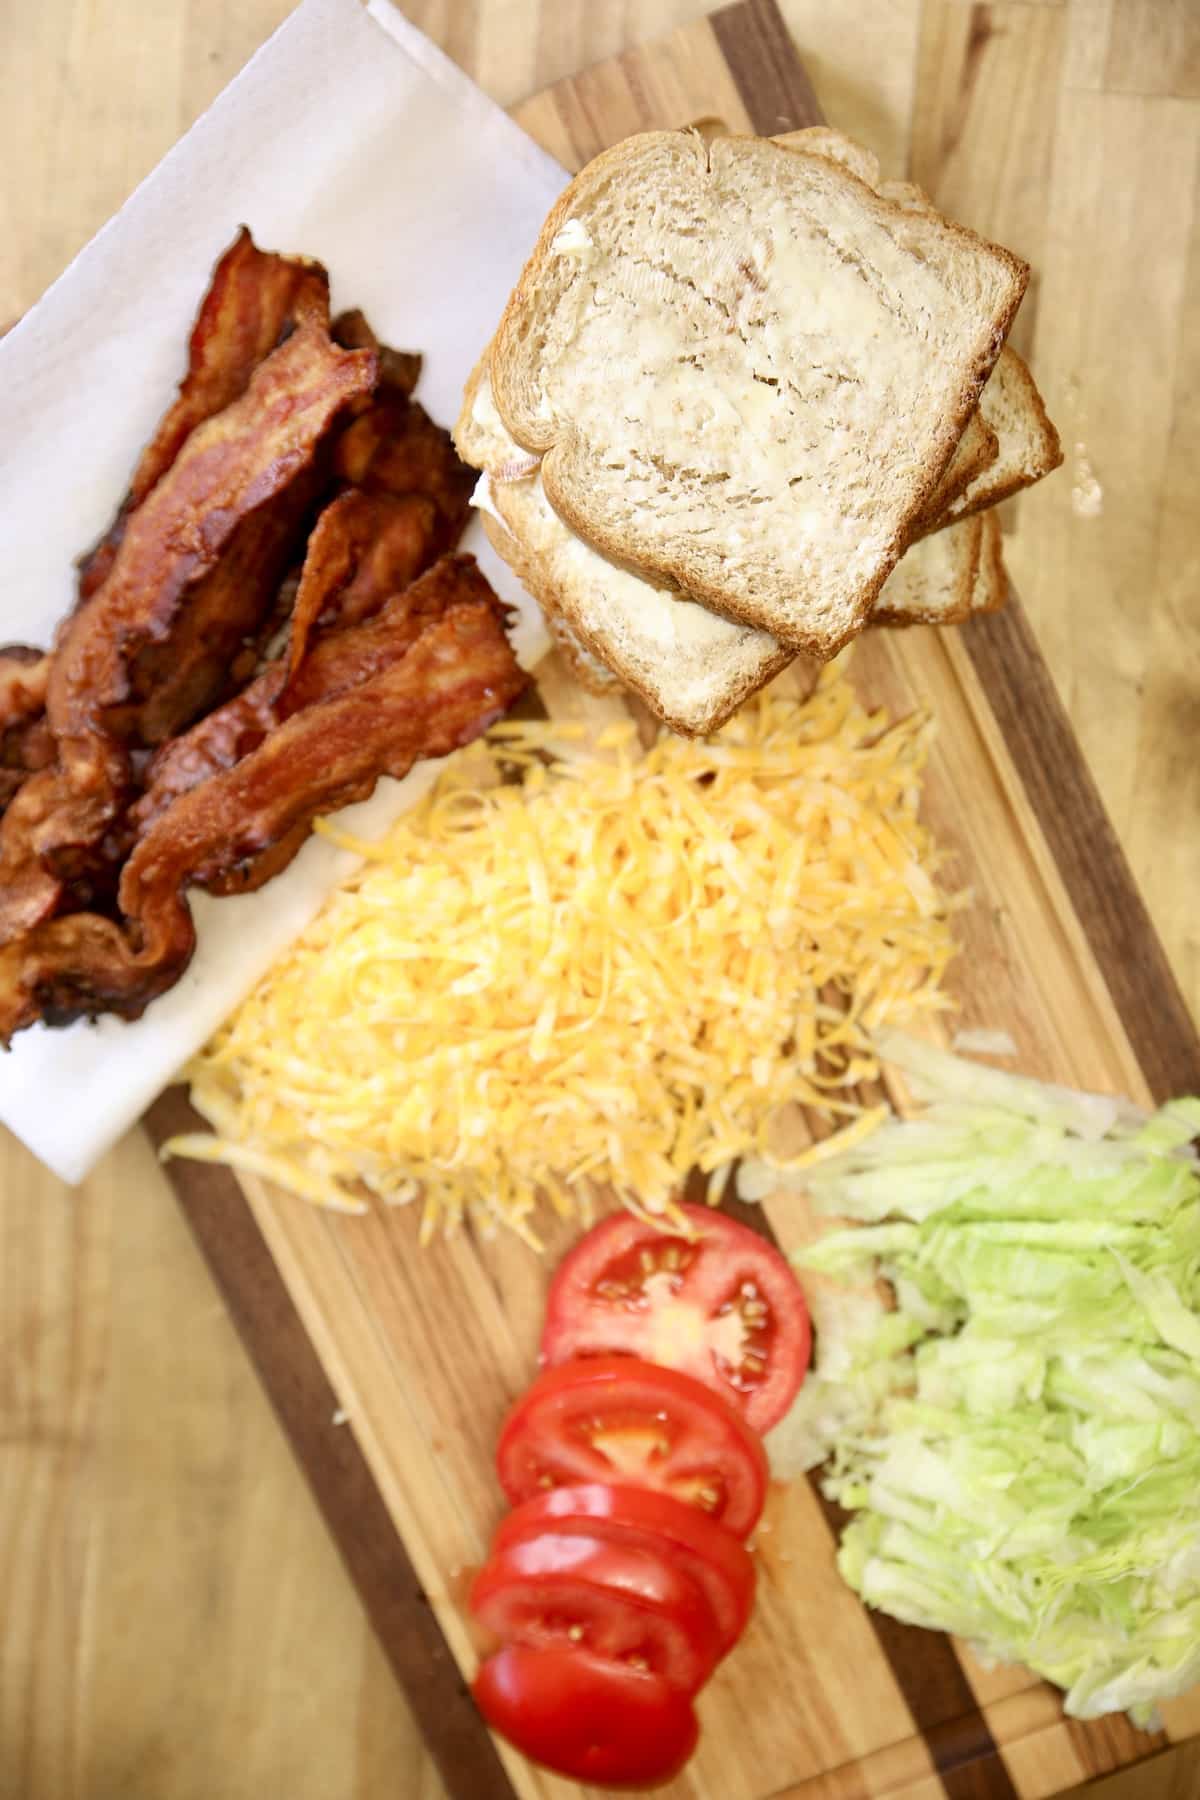 Cutting board with crisp bacon, buttered bread, shredded cheese. tomato, lettuce.